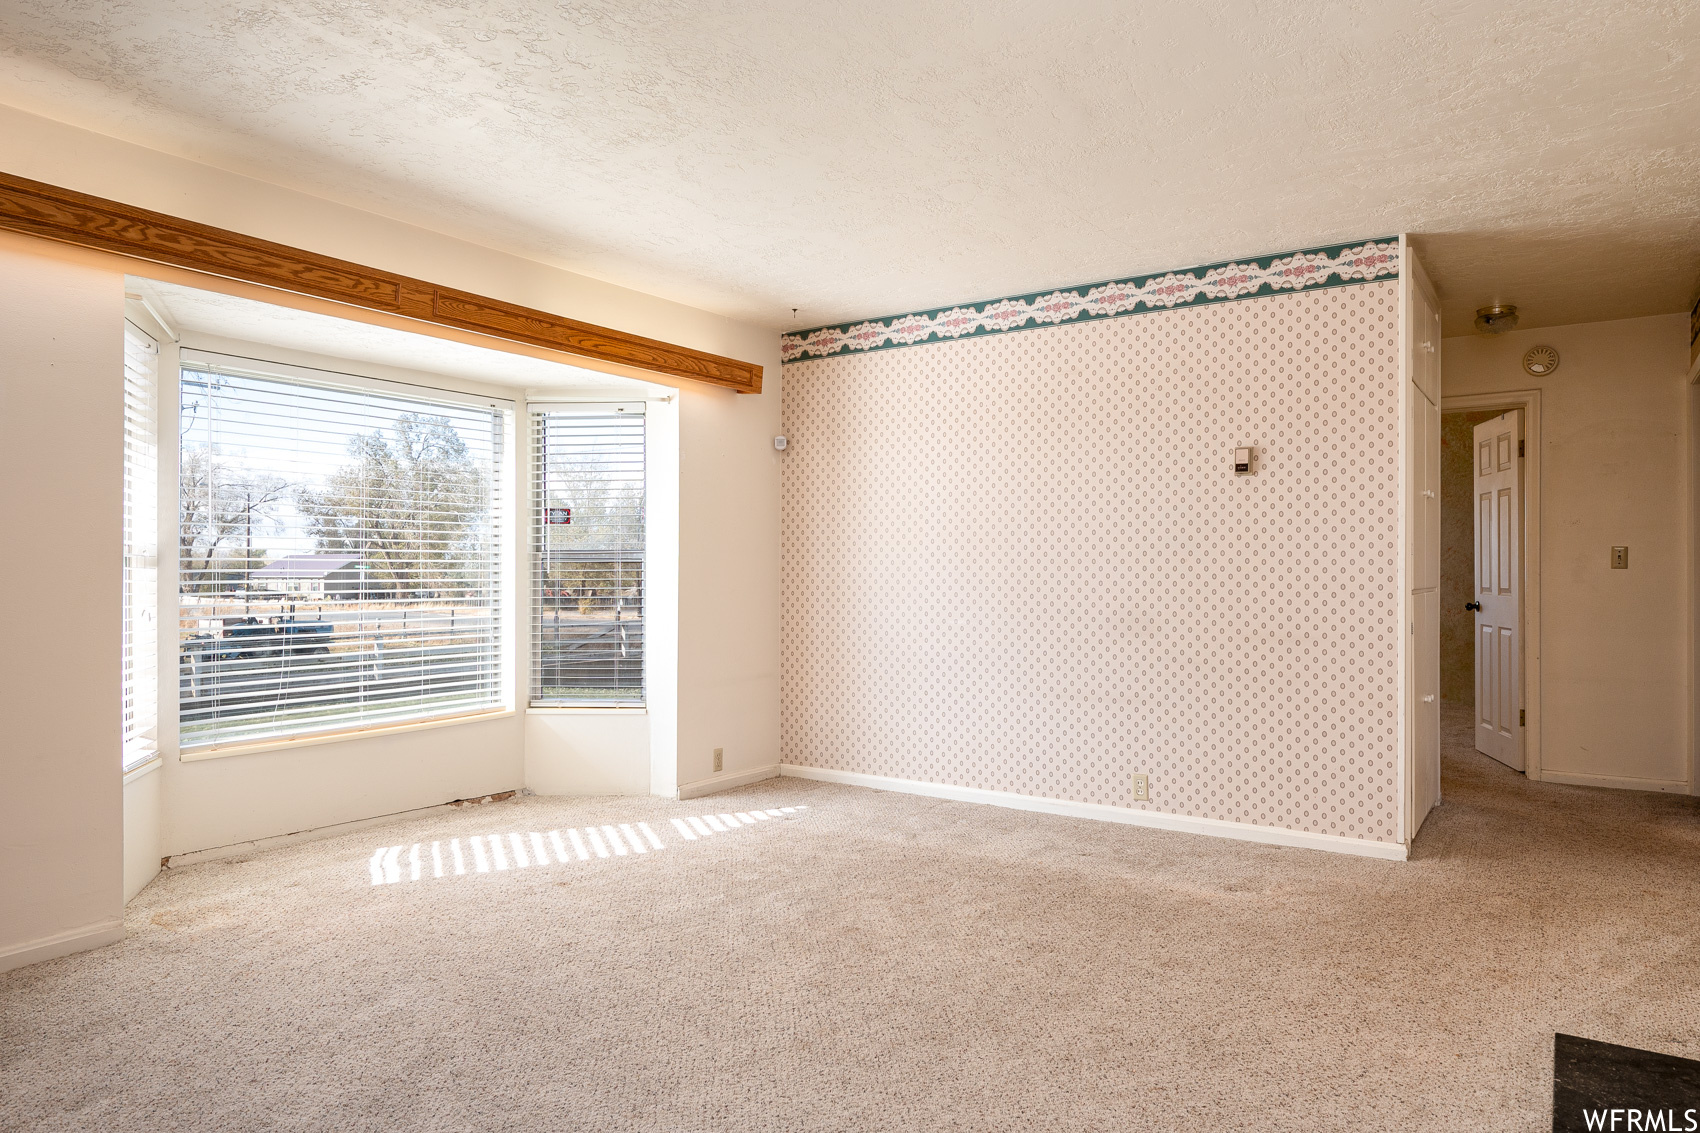 Empty room with light colored carpet and a textured ceiling